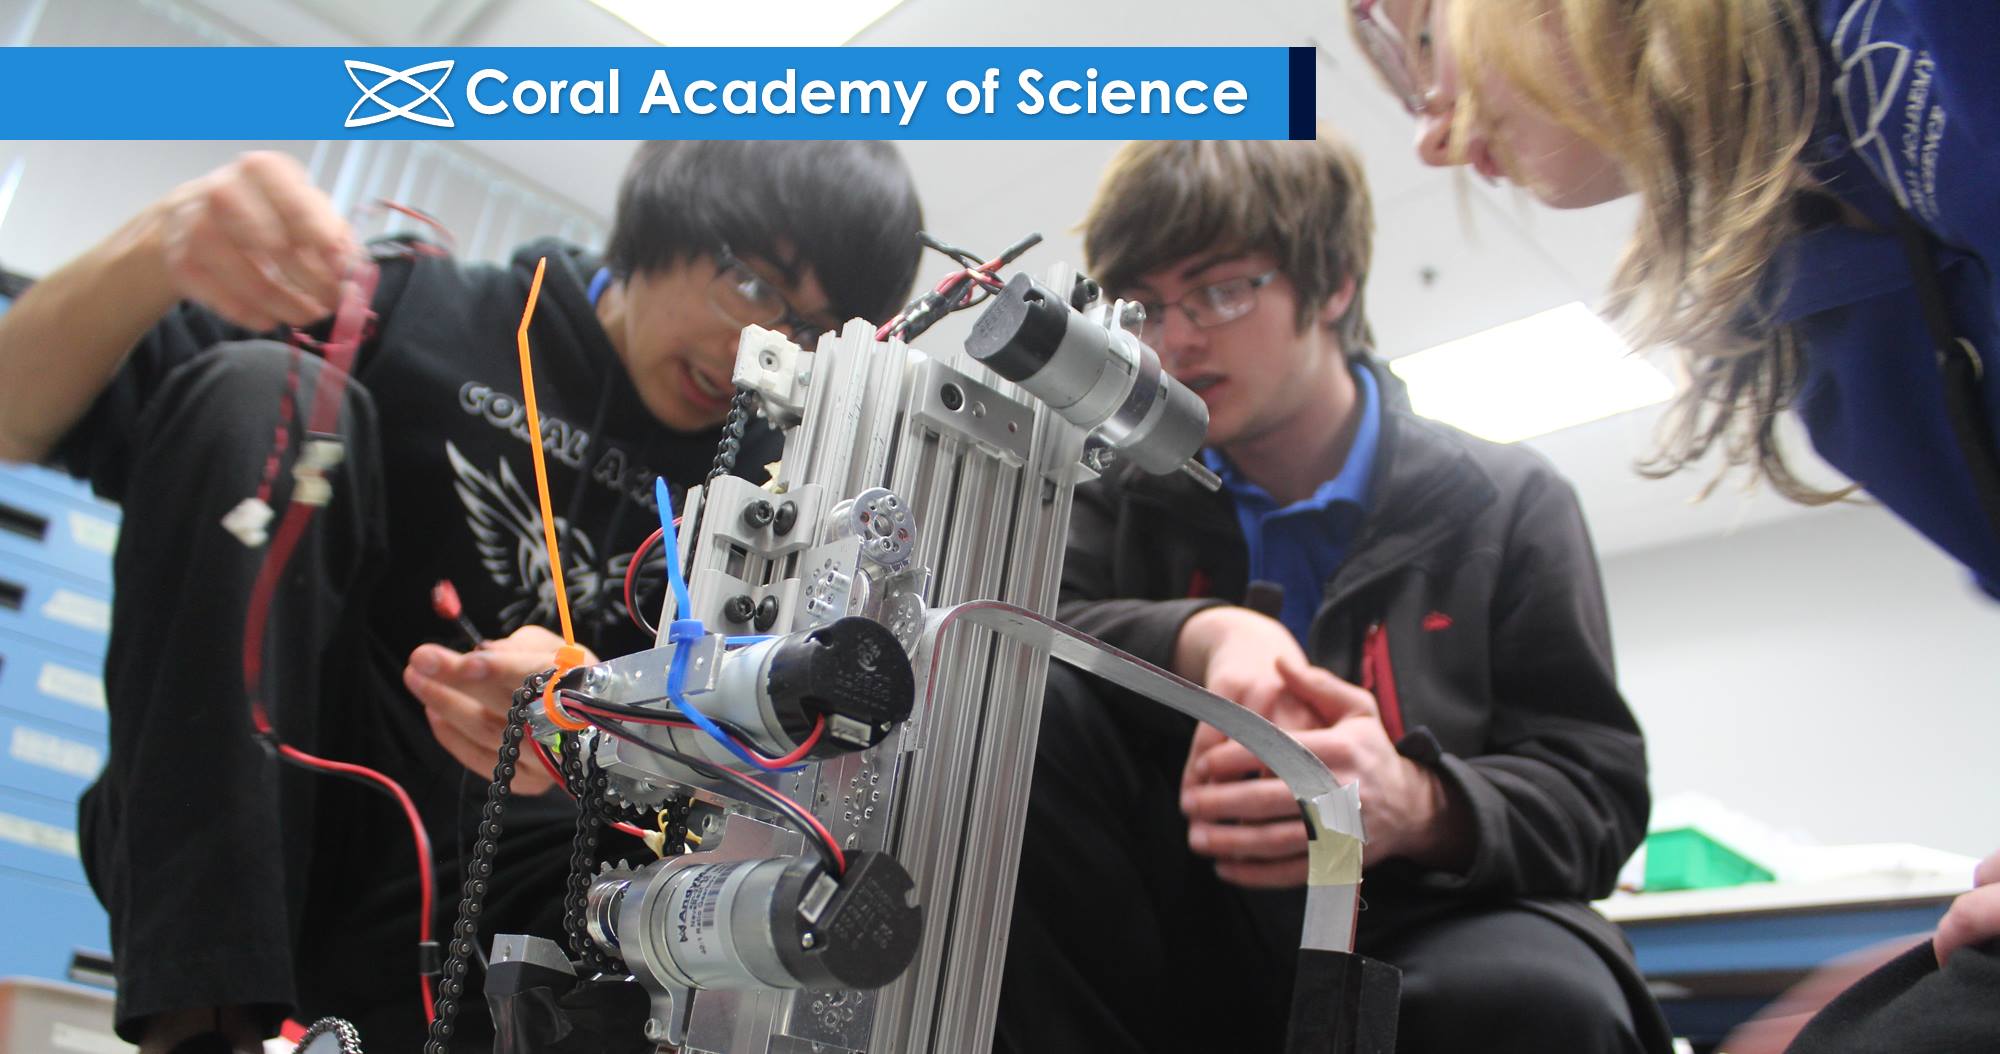 Coral Academy of Science